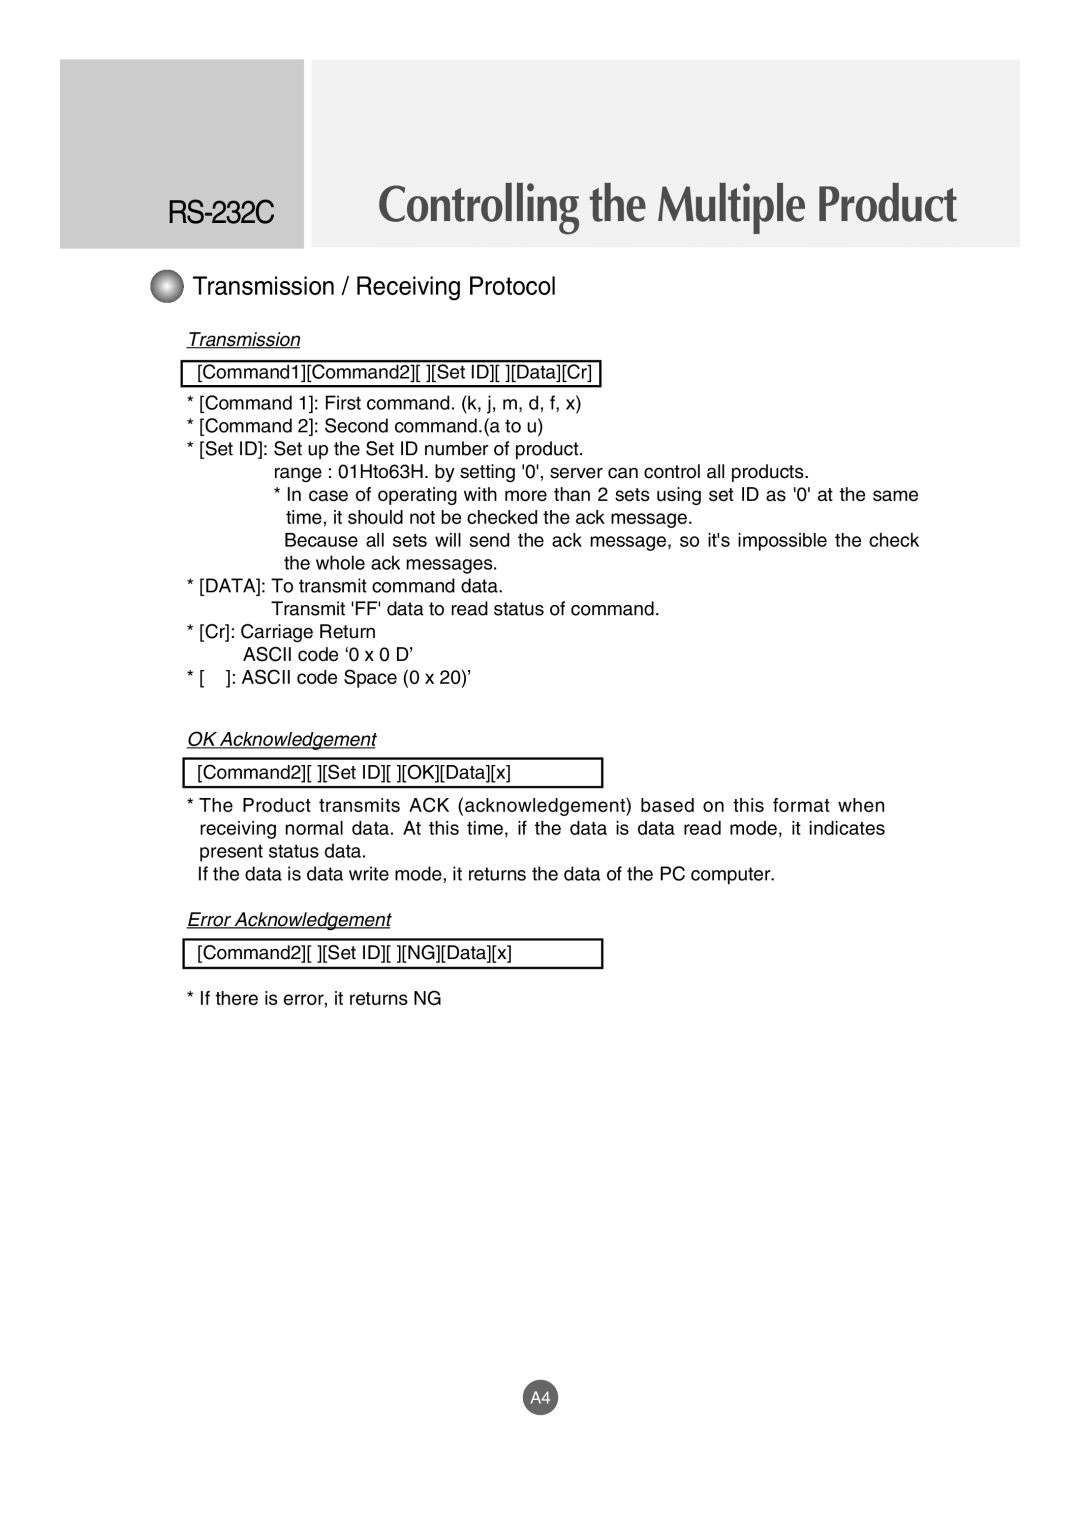 LG Electronics M4210LCBA Transmission / Receiving Protocol, RS-232C Controlling the Multiple Product, OK Acknowledgement 